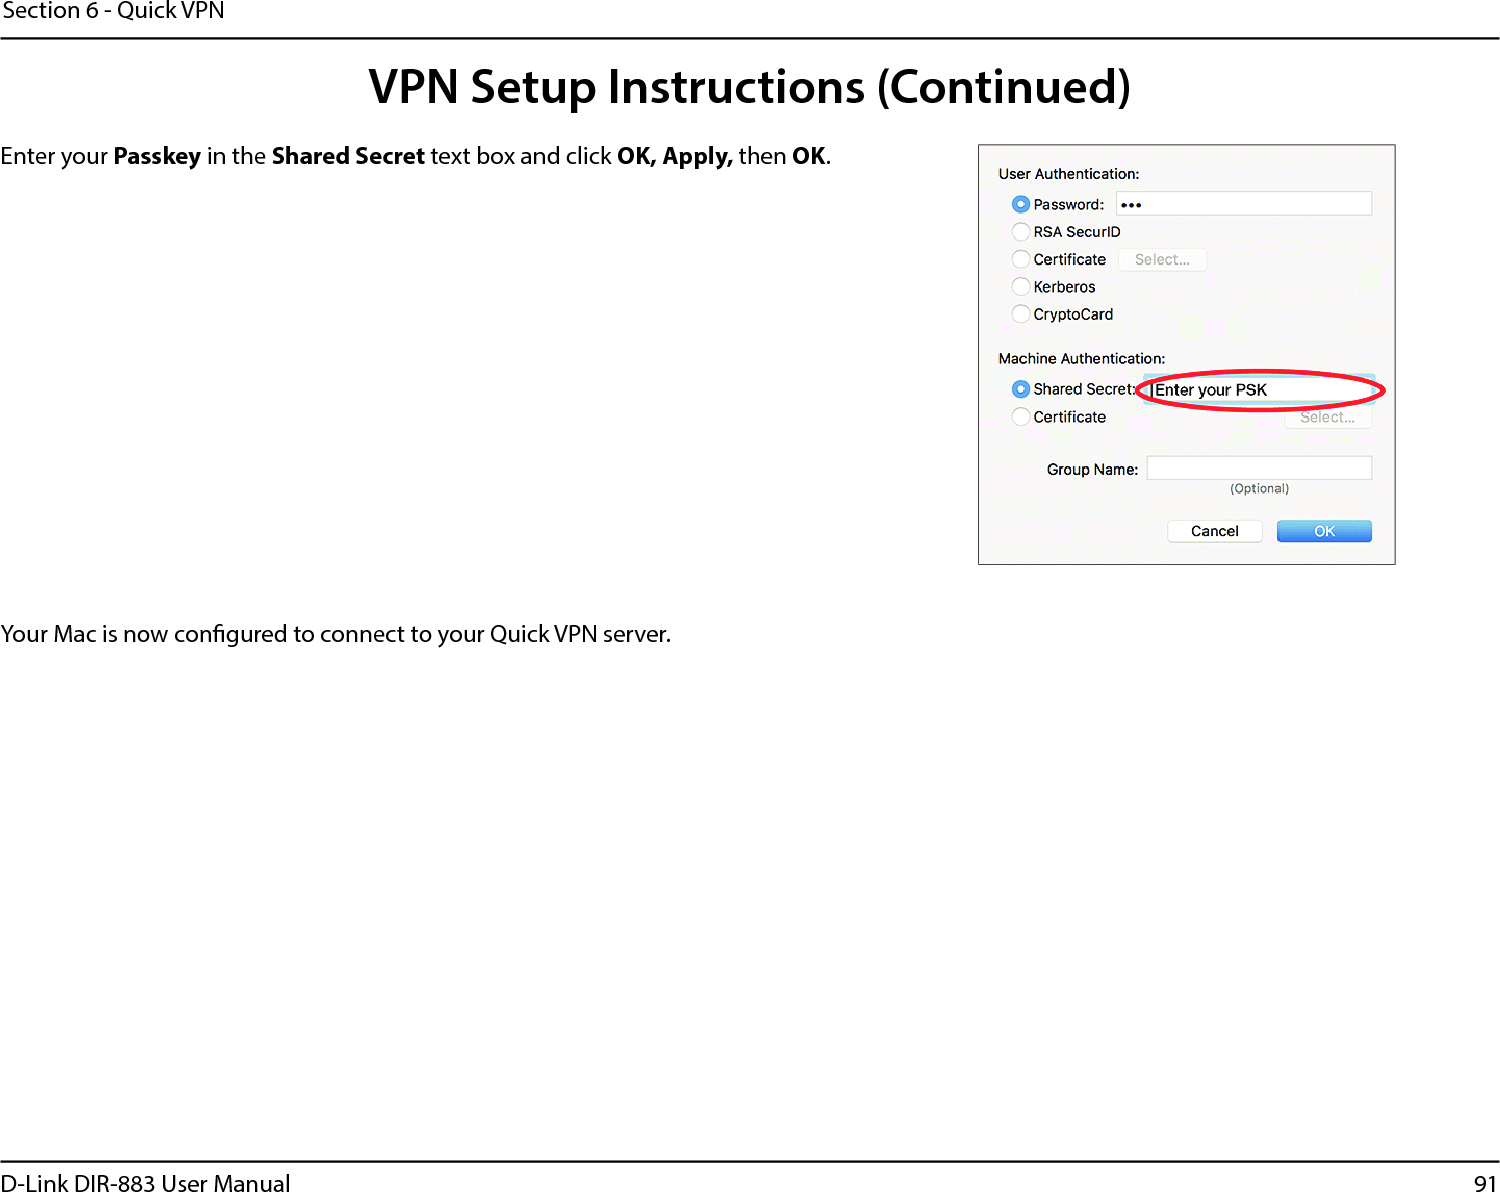 91D-Link DIR-883 User ManualSection 6 - Quick VPNEnter your Passkey in the Shared Secret text box and click OK, Apply, then OK.Your Mac is now congured to connect to your Quick VPN server.VPN Setup Instructions (Continued)